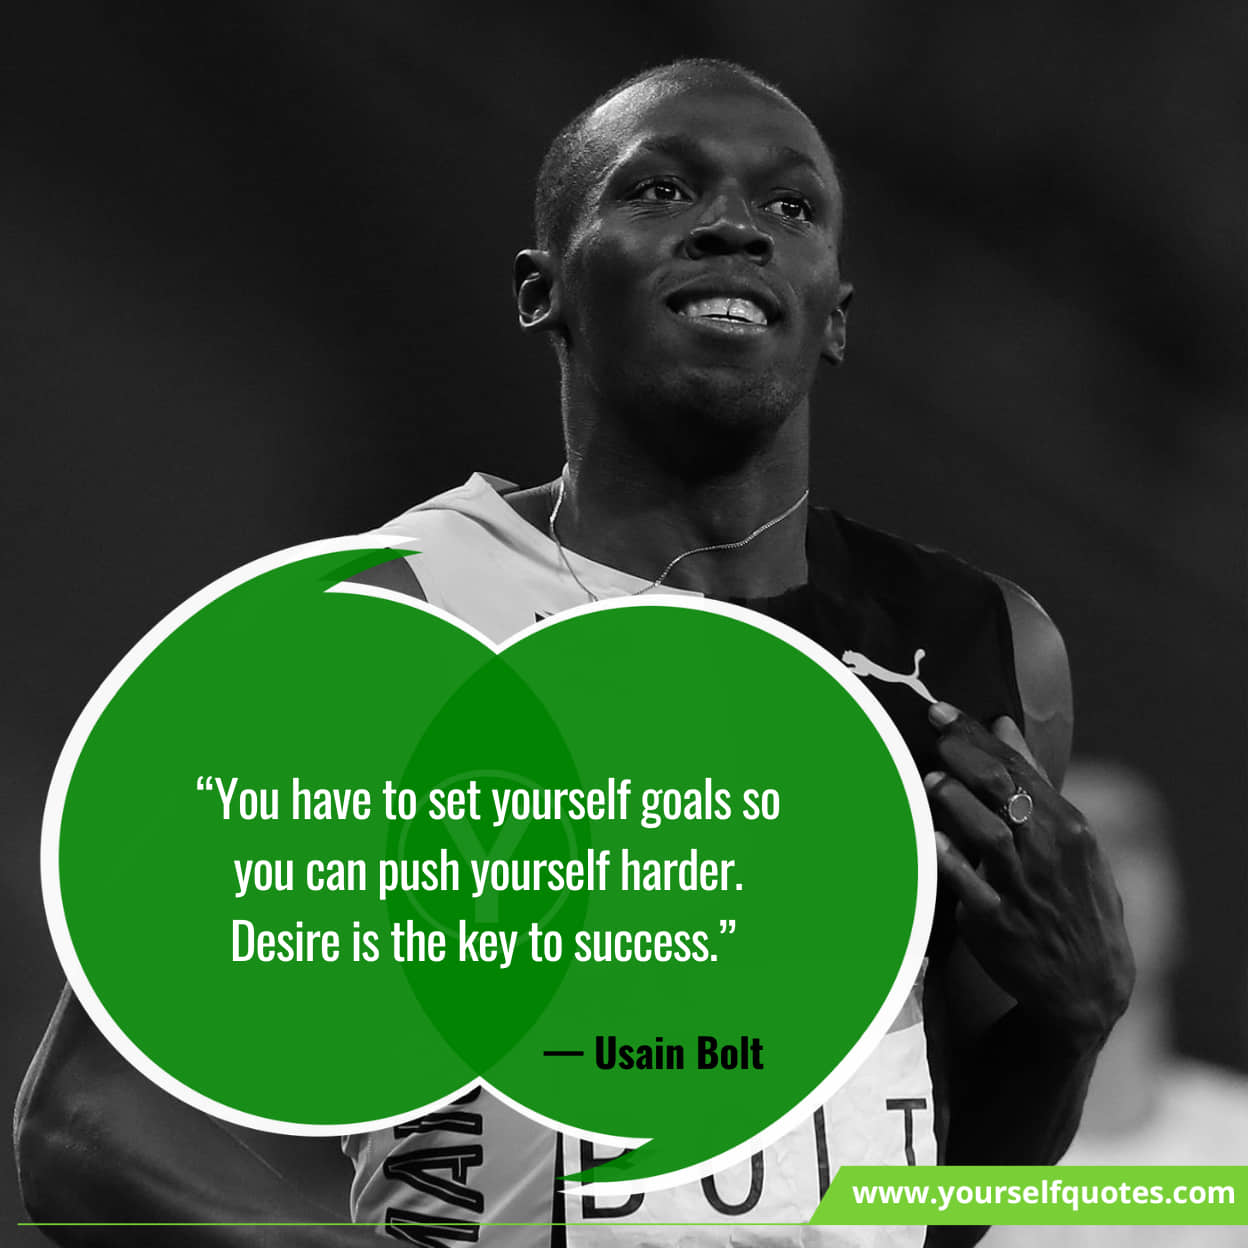 Best Famous Quotes By Famous Athletes